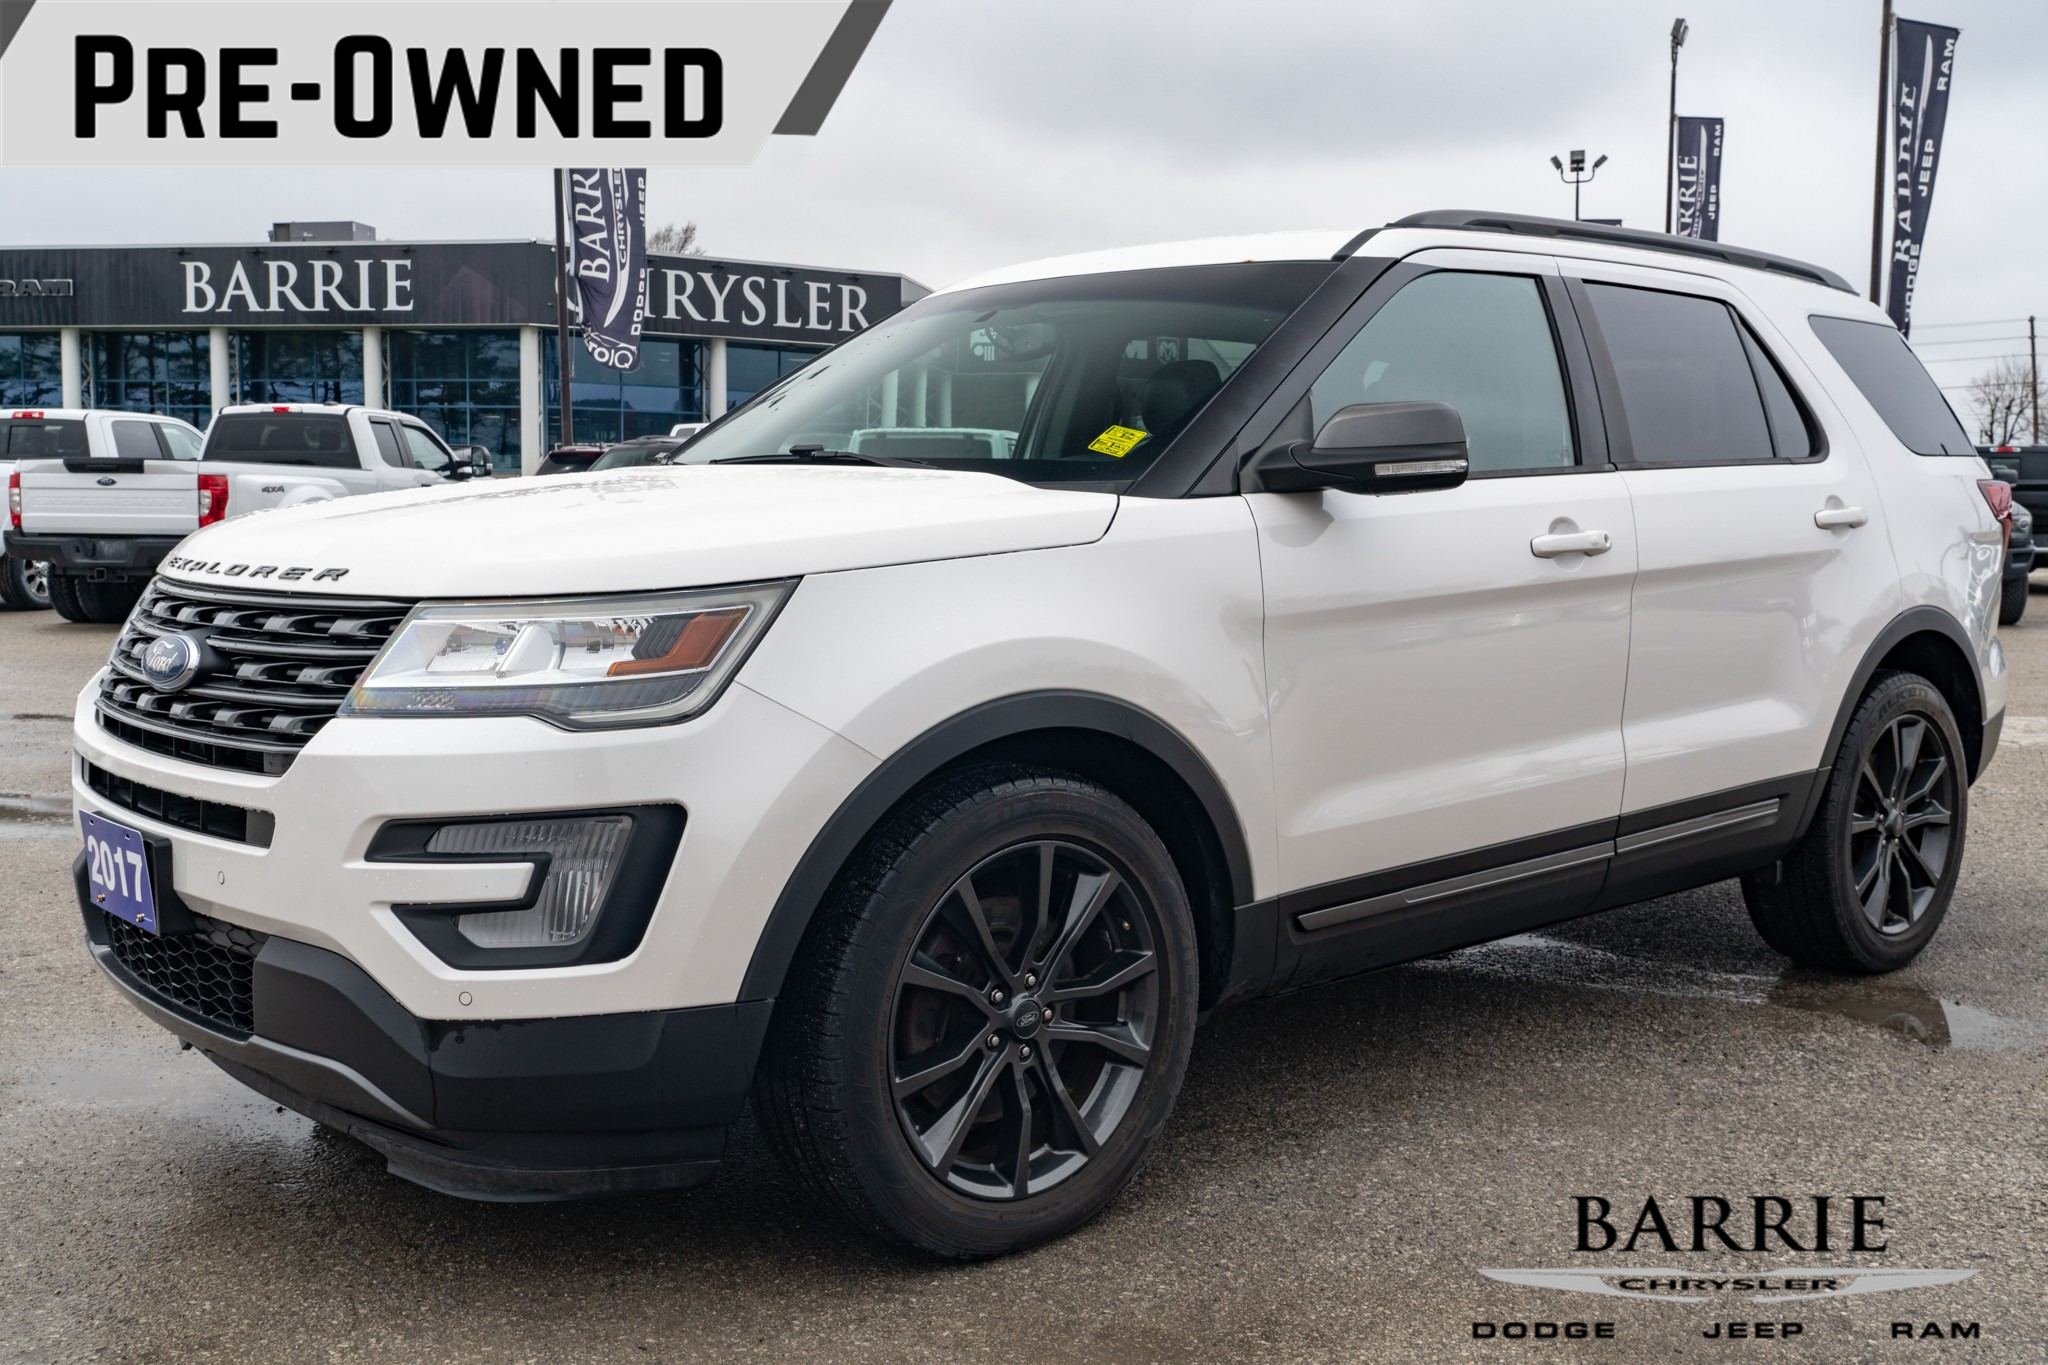 2017 Ford Explorer GREY AND BLACK INTERIOR | ONE OWNER | CLEAN CARFAX